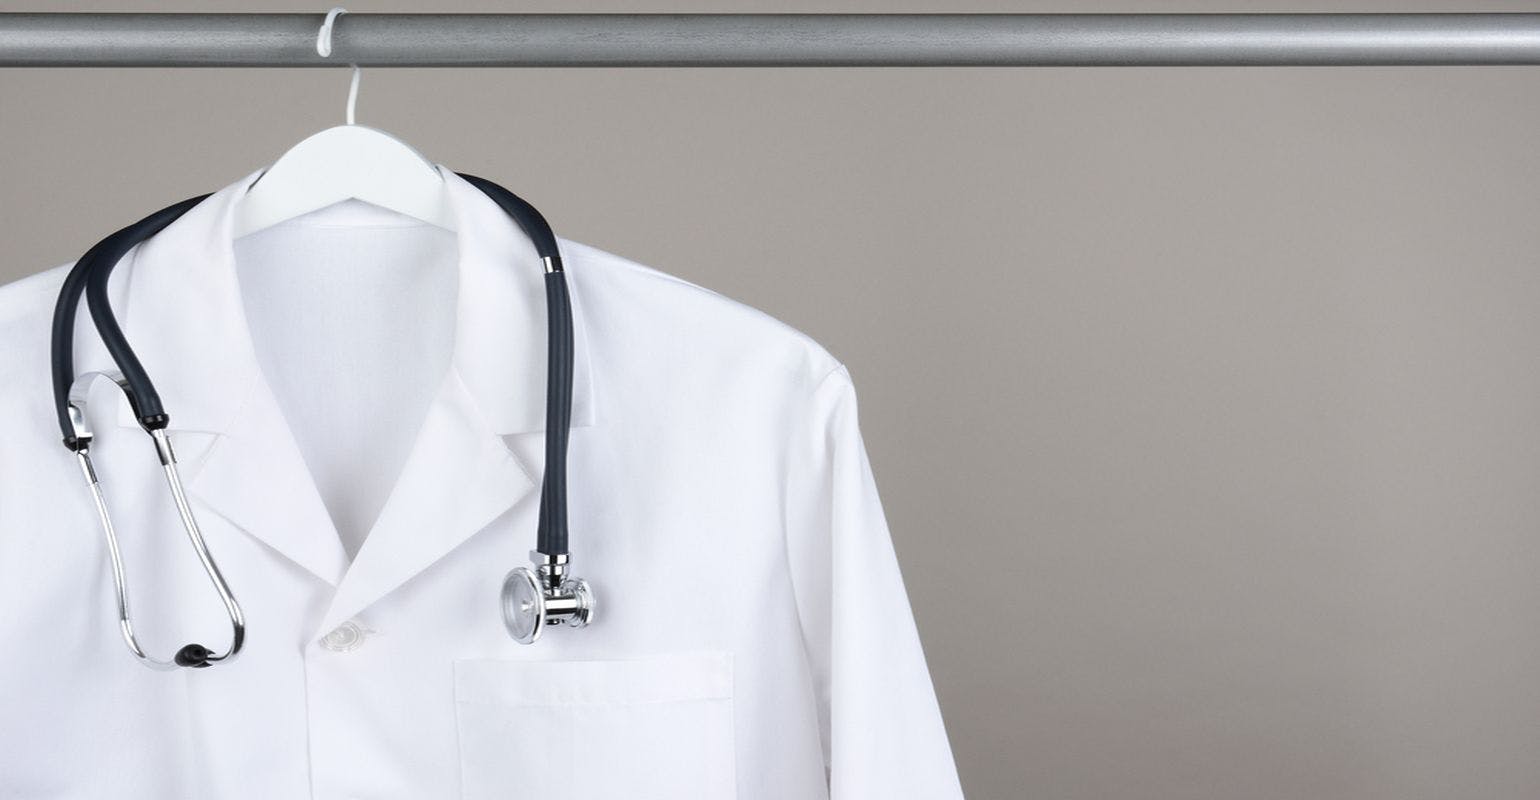 The Physician's White Coat: Iconic and Comforting or Likely Covered in Germs?